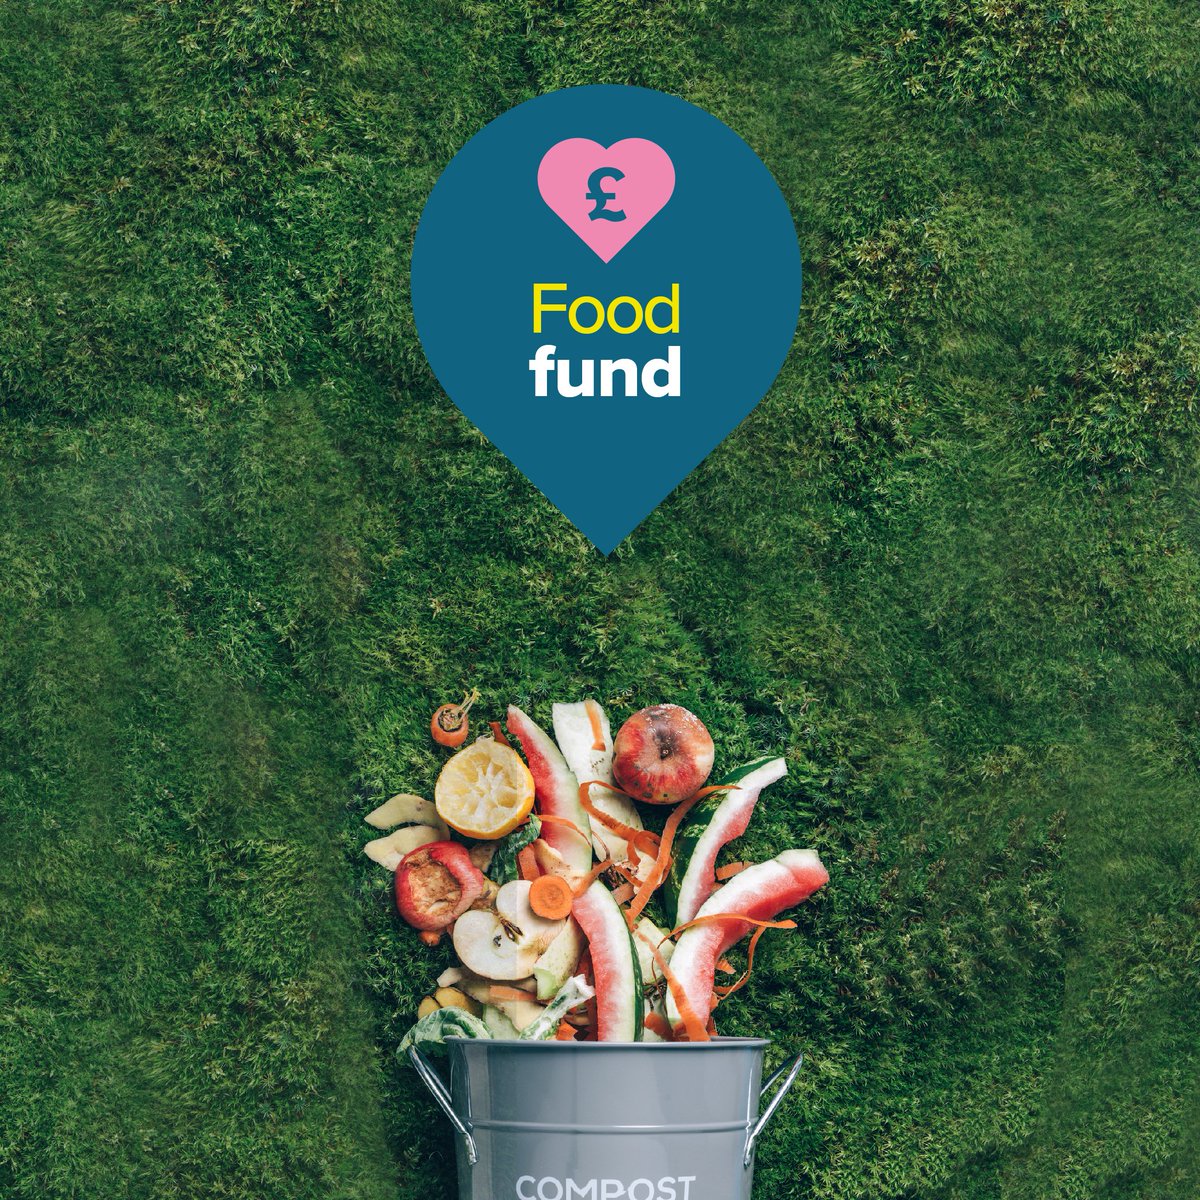 We believe access to food is a person’s right & are proud to launch our Food Fund. We're committed to supporting initiatives across the south & empower communities with the skills to prepare meals, reduce waste & improve financial health. Learn more at bit.ly/FoodFund2024